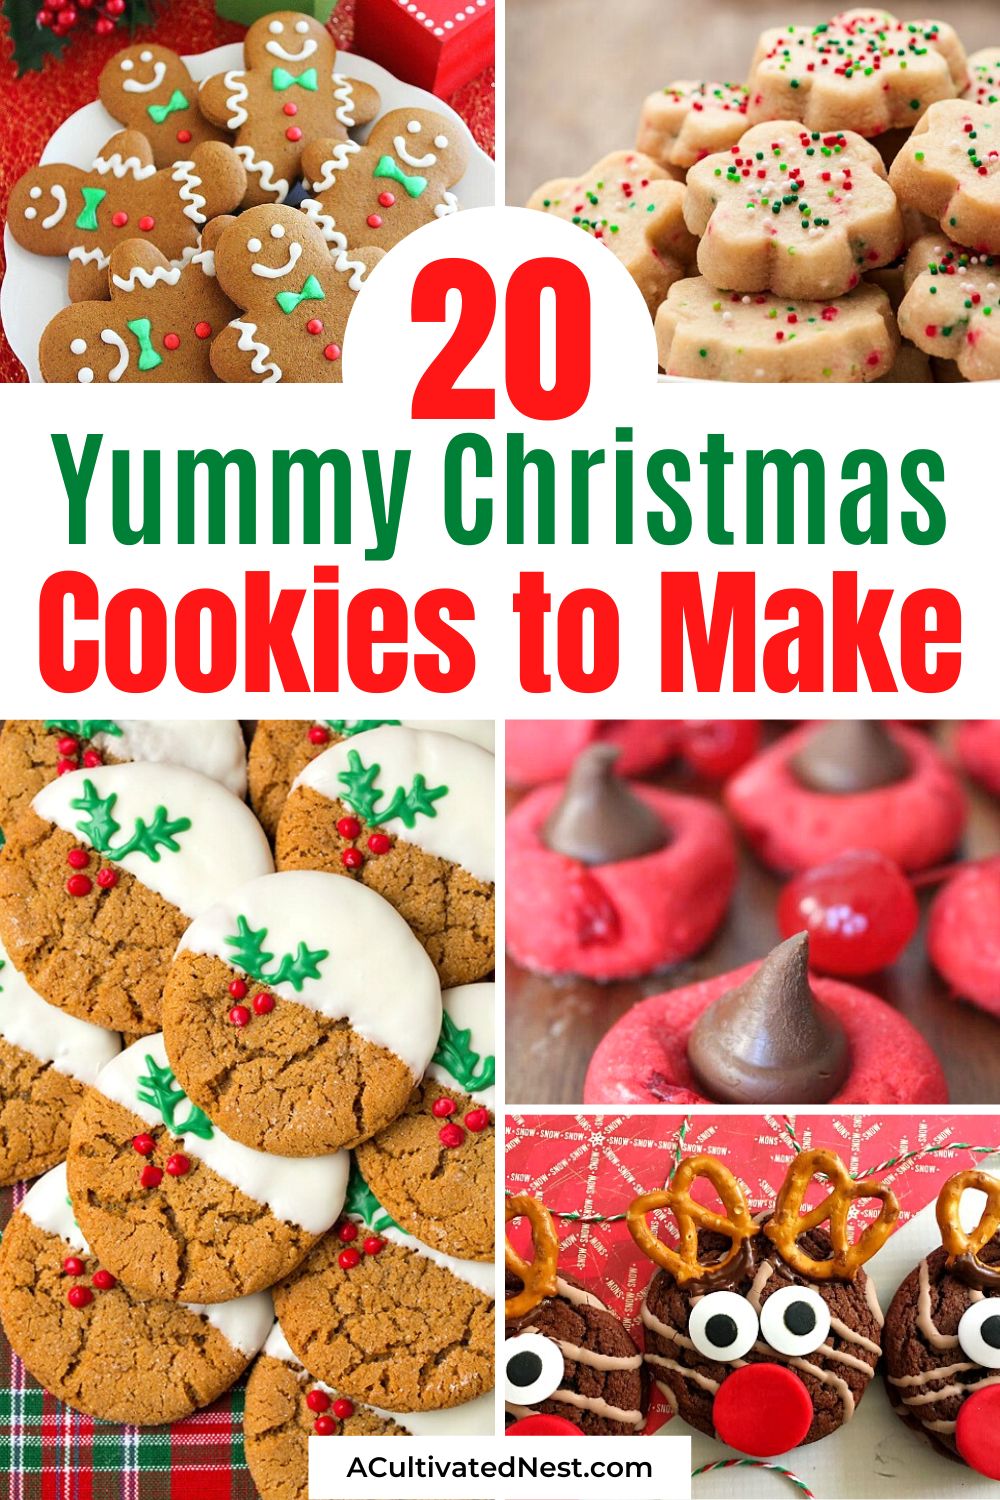 20 Yummy Christmas Cookie Recipes- Check out all of these tasty Christmas cookie recipes for new treats to bake for your family or for a Christmas cookie exchange! | holiday dessert ideas, #Christmas #ChristmasCookies #cookies #desserts #ACultivatedNest